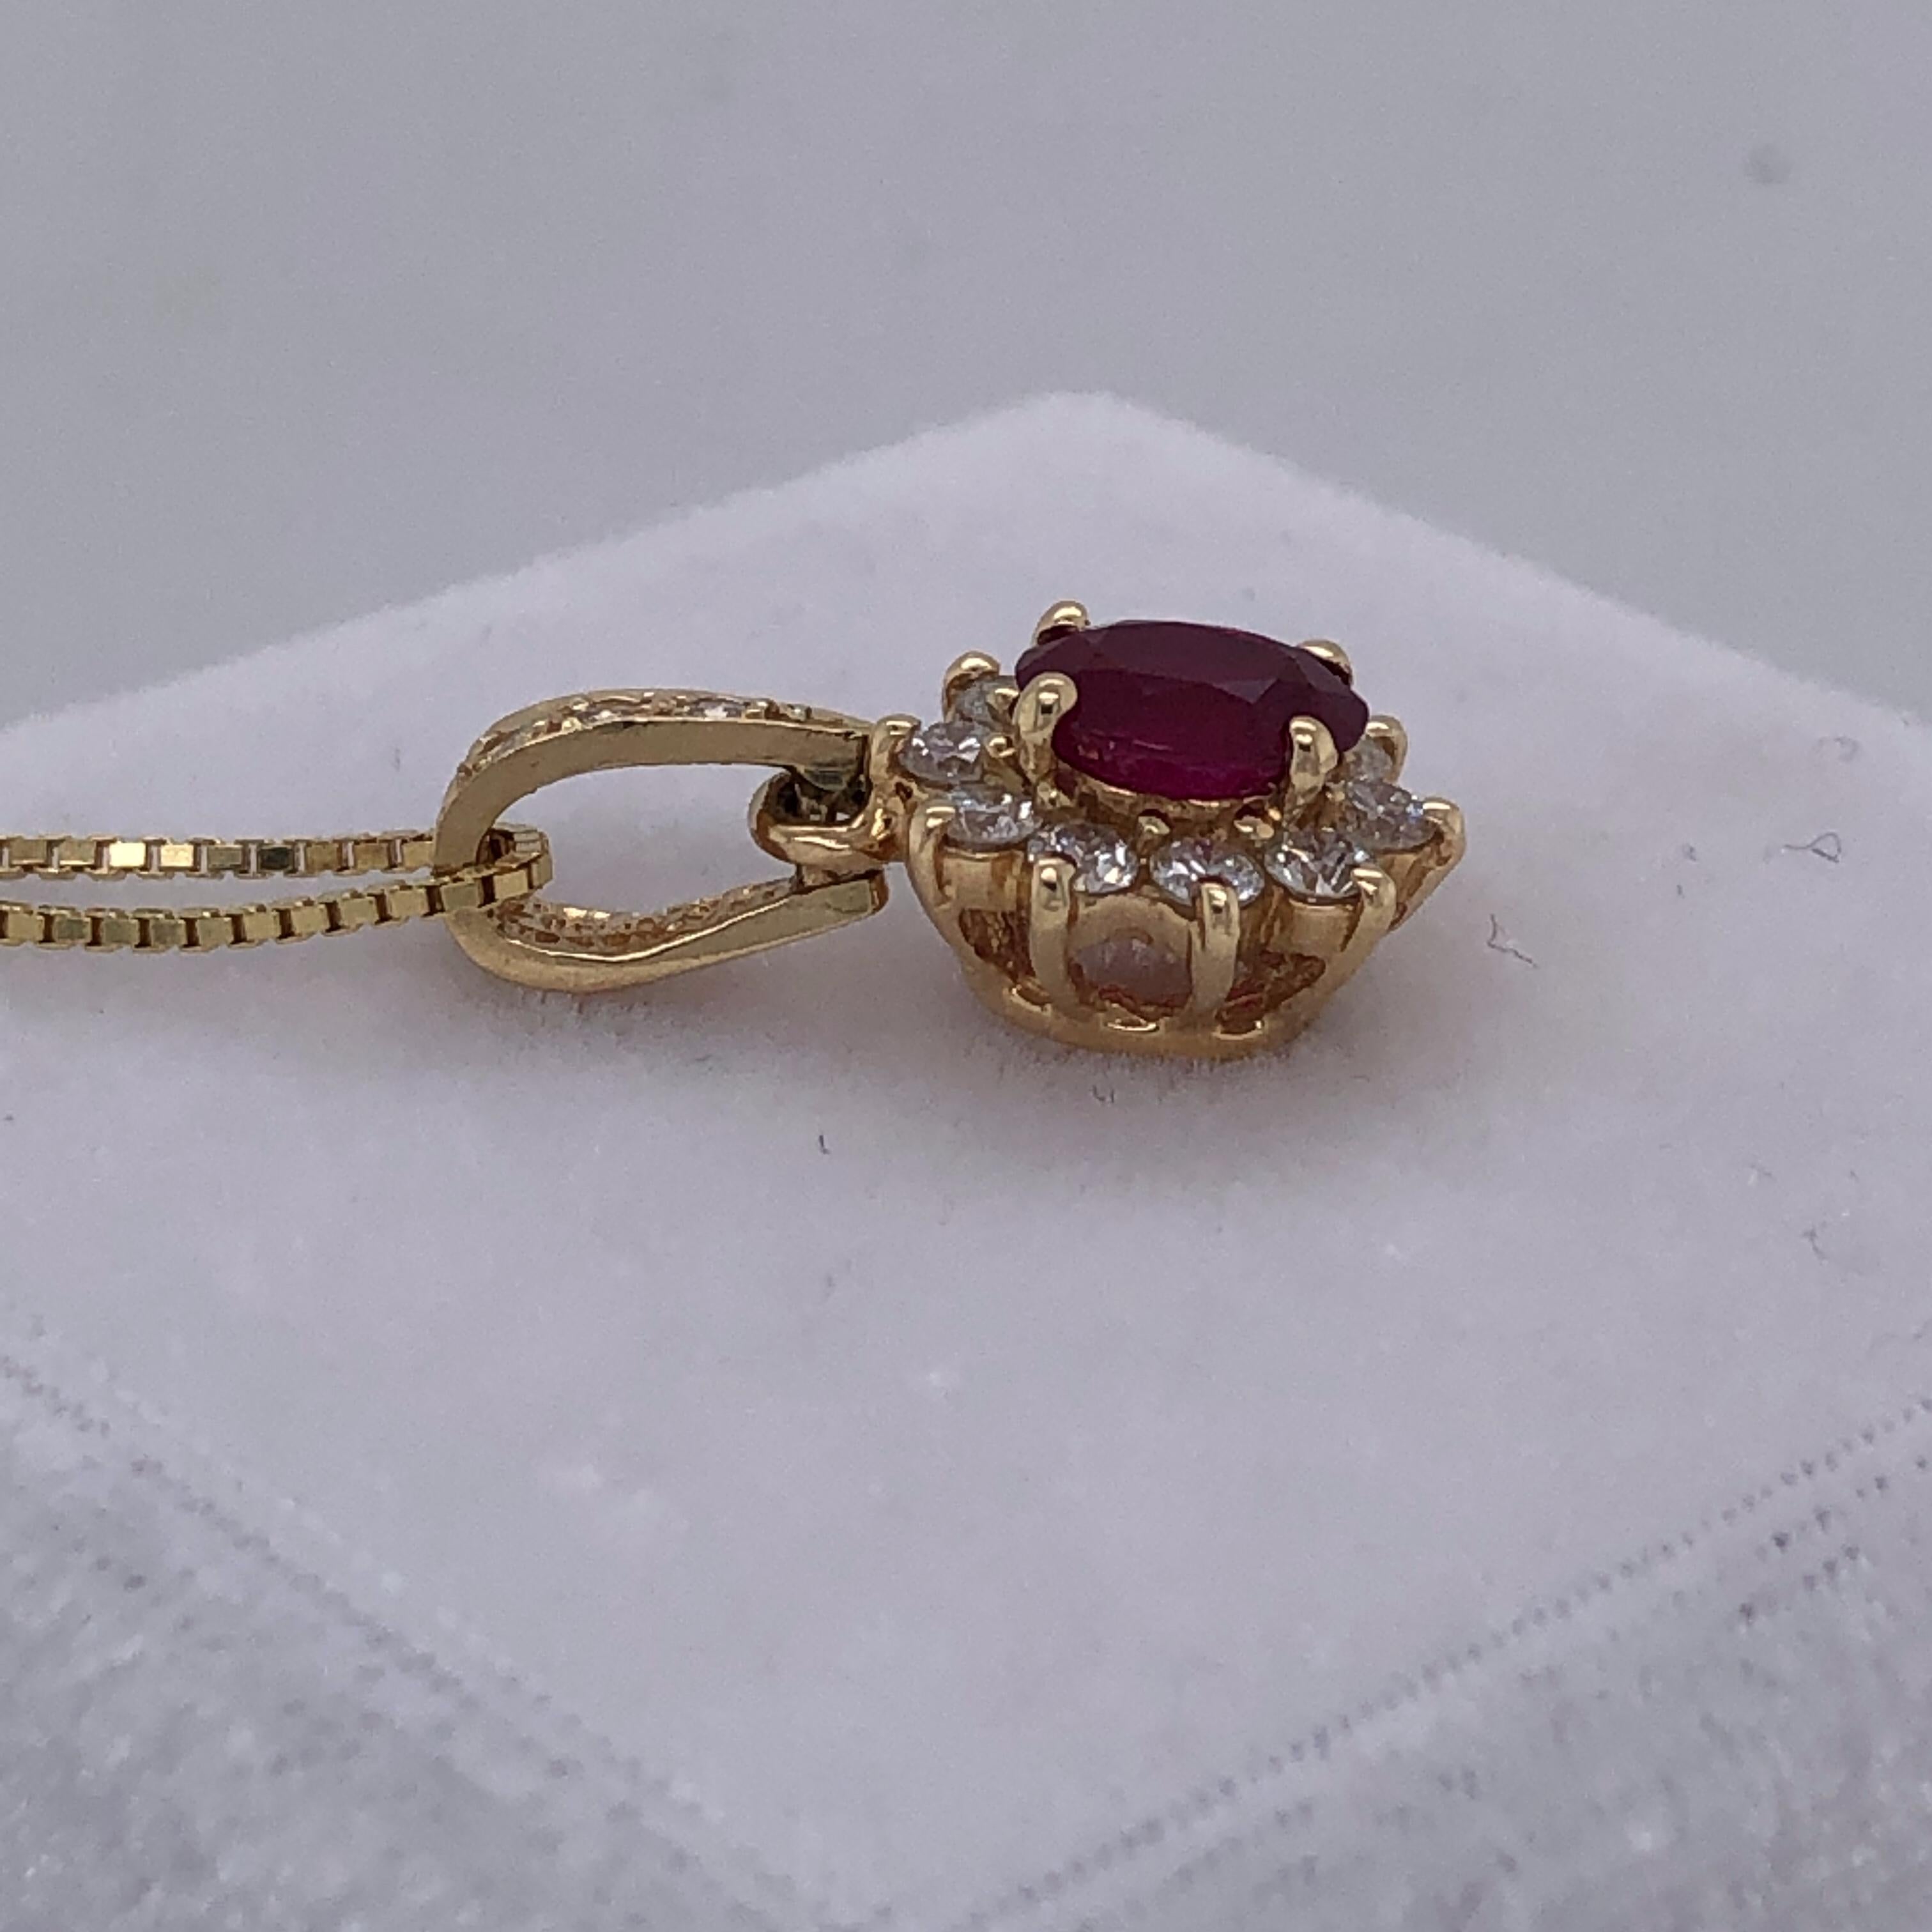 One 14 karat yellow gold oval shaped pendant, prong set with one 6.8 x 5.2mm oval ruby approximately 1.03 carat total, surrounded by ten 1.8mm prong set round brilliant diamonds, approximately 0.50 carat total weight with matching H/I color and